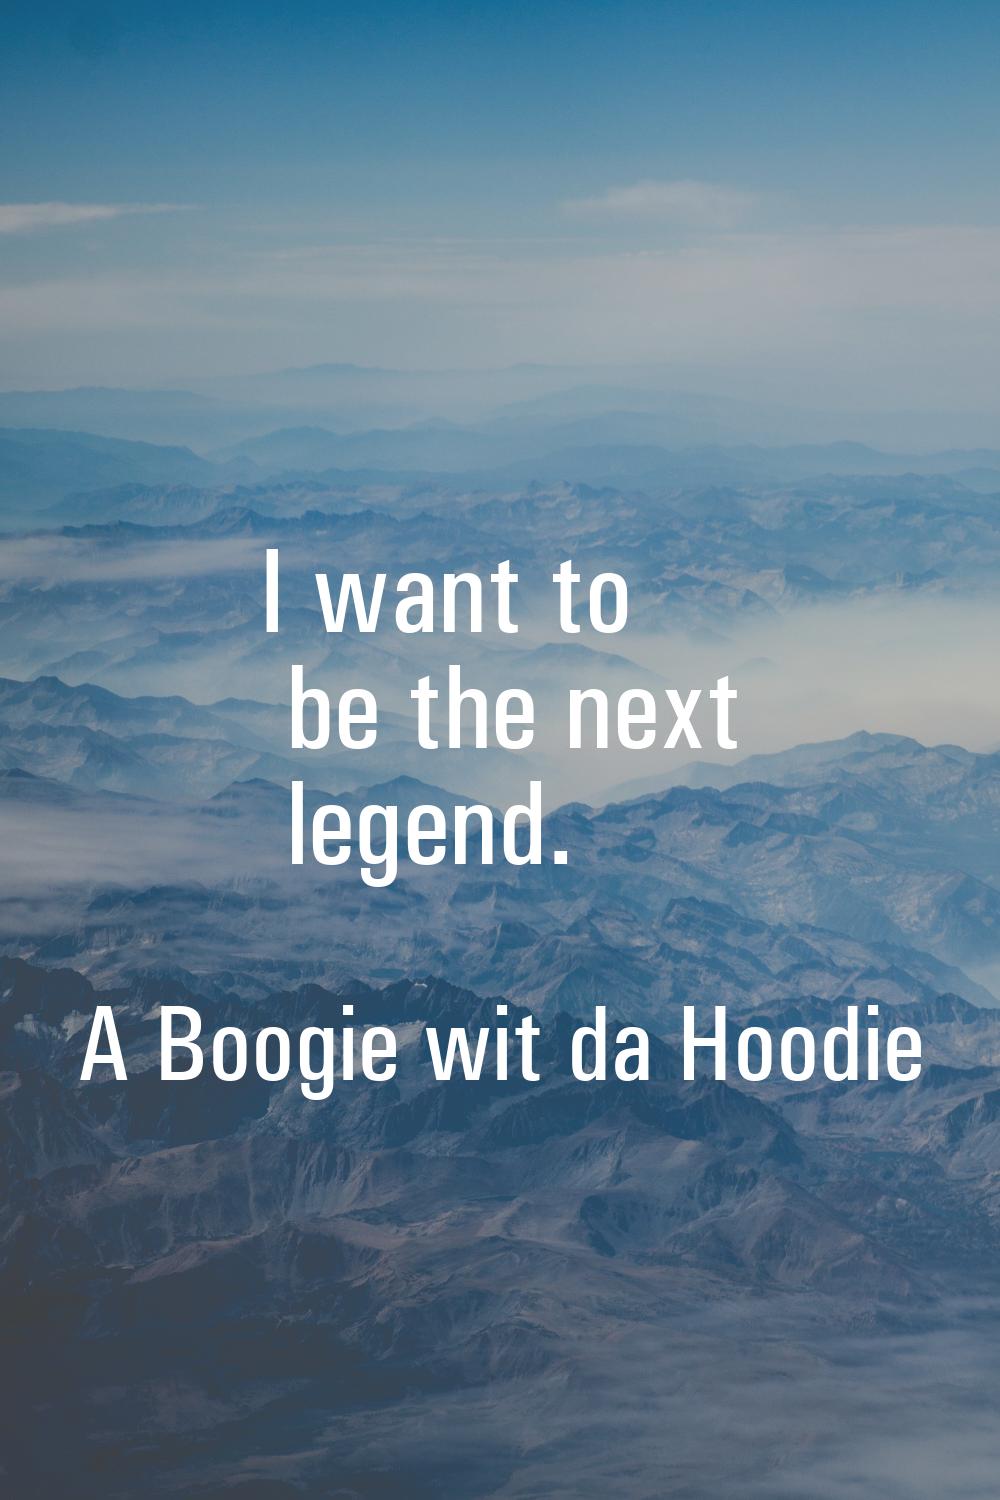 I want to be the next legend.